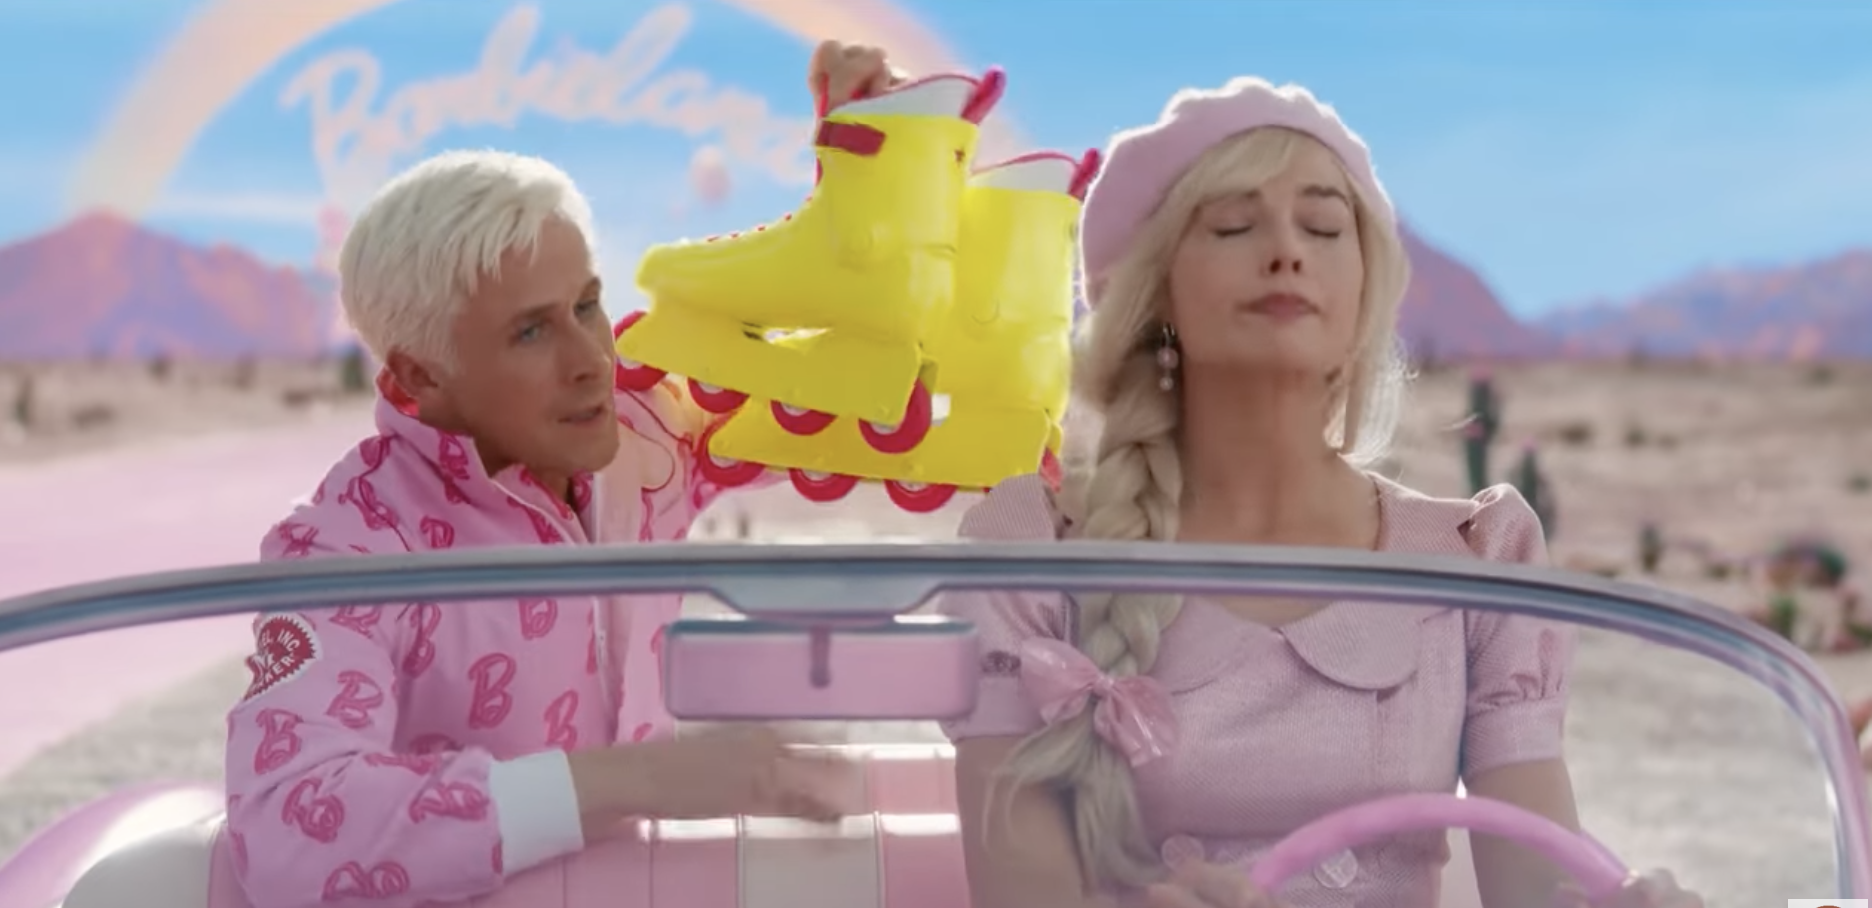 Barbie and Ken from the &quot;Barbie&quot; movie are in the car. Ken is holding up roller skates